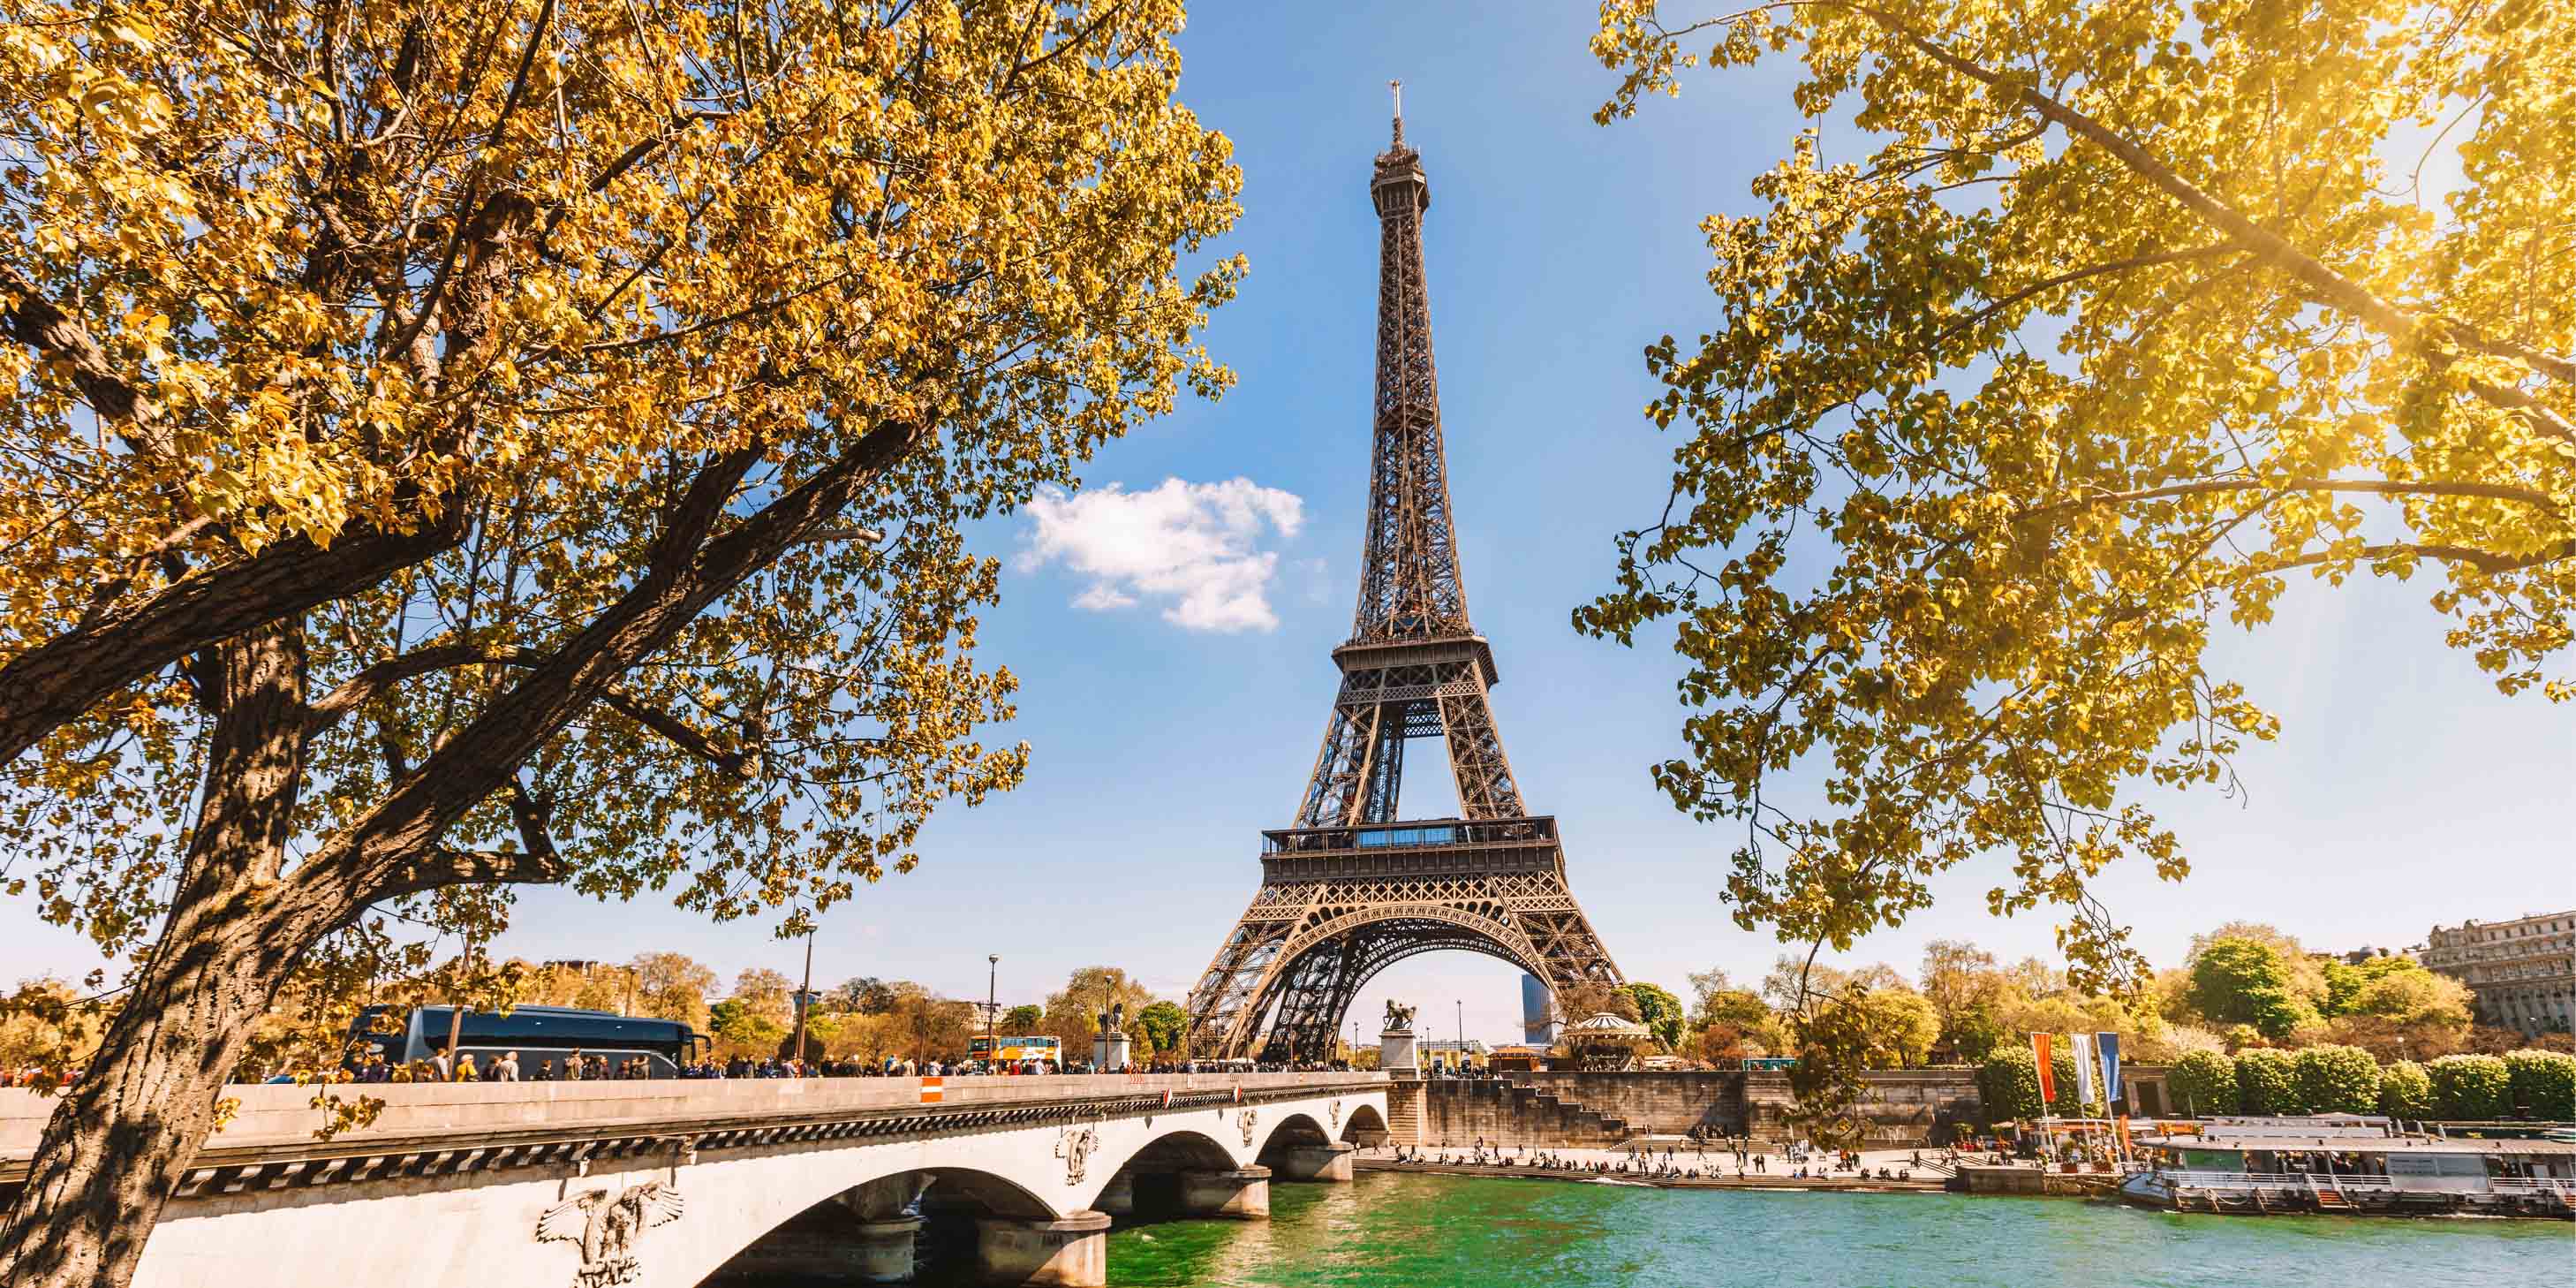 Eiffel Tower on a sunny day, seen from the Seine River, with two trees and Pont d’léna in the foreground